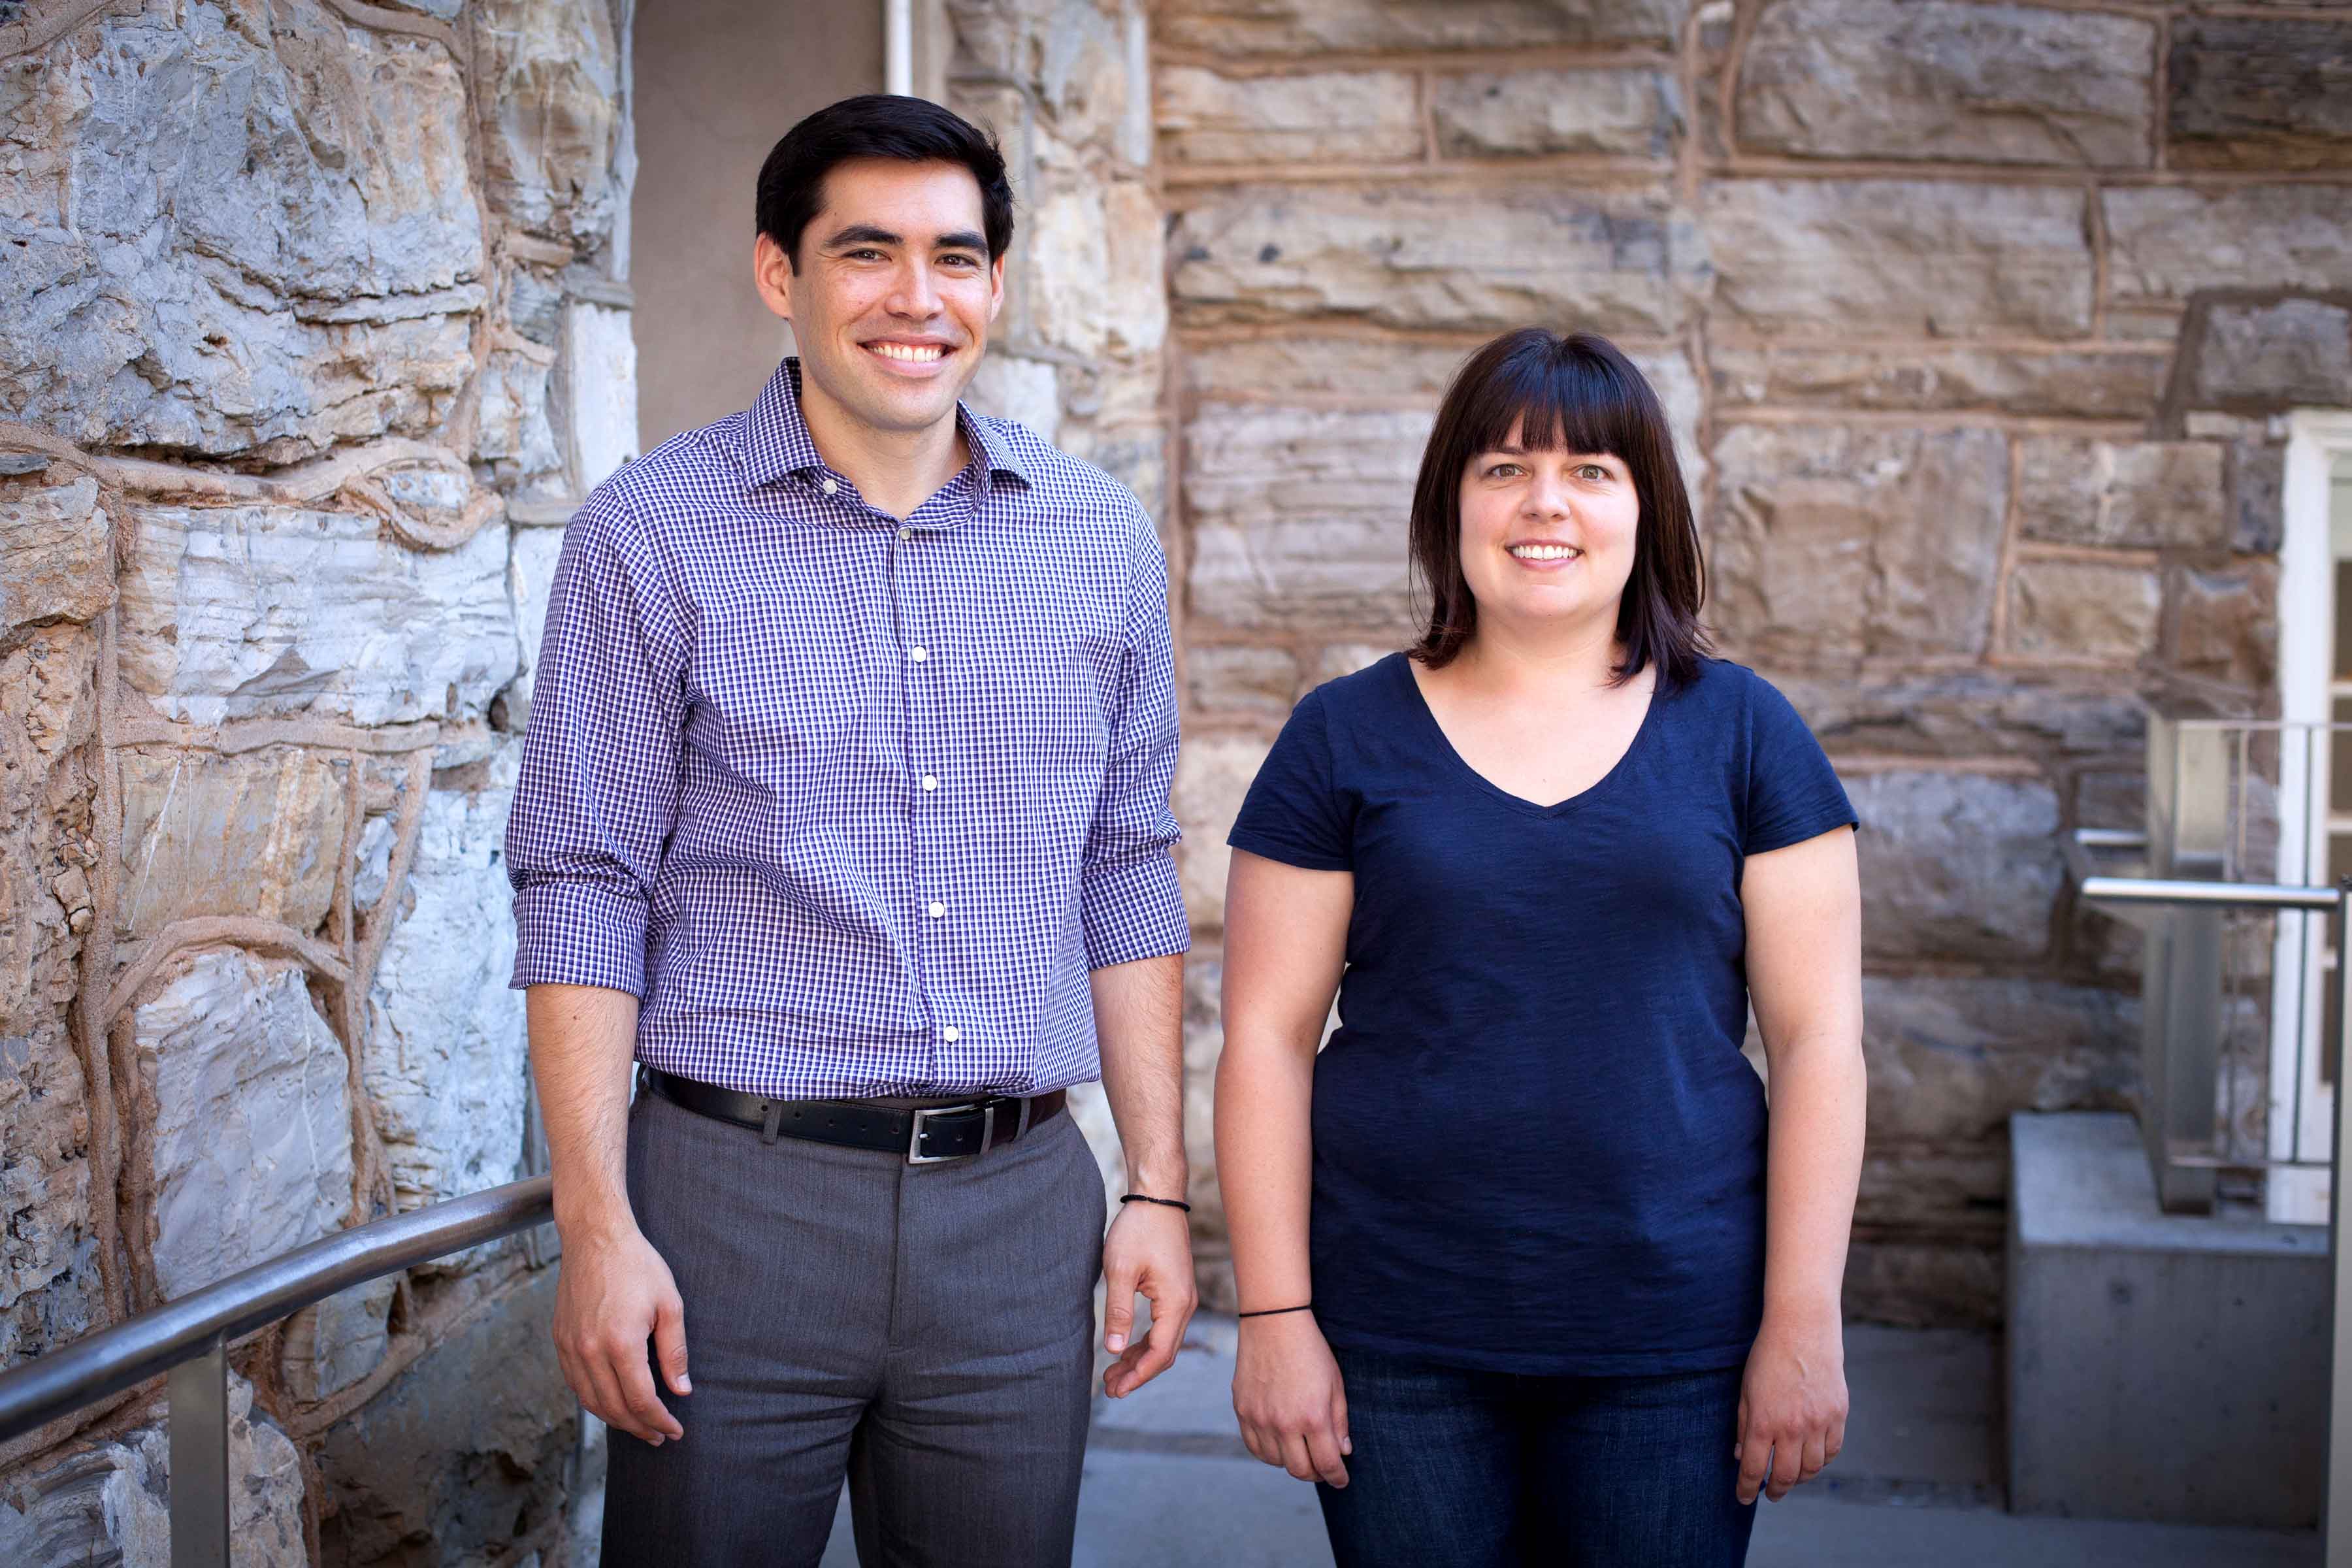 Jeffrey Glenn, Ph.D. candidate in psychology, and Alicia Nobles, Ph.D. candidate in systems and information engineering.